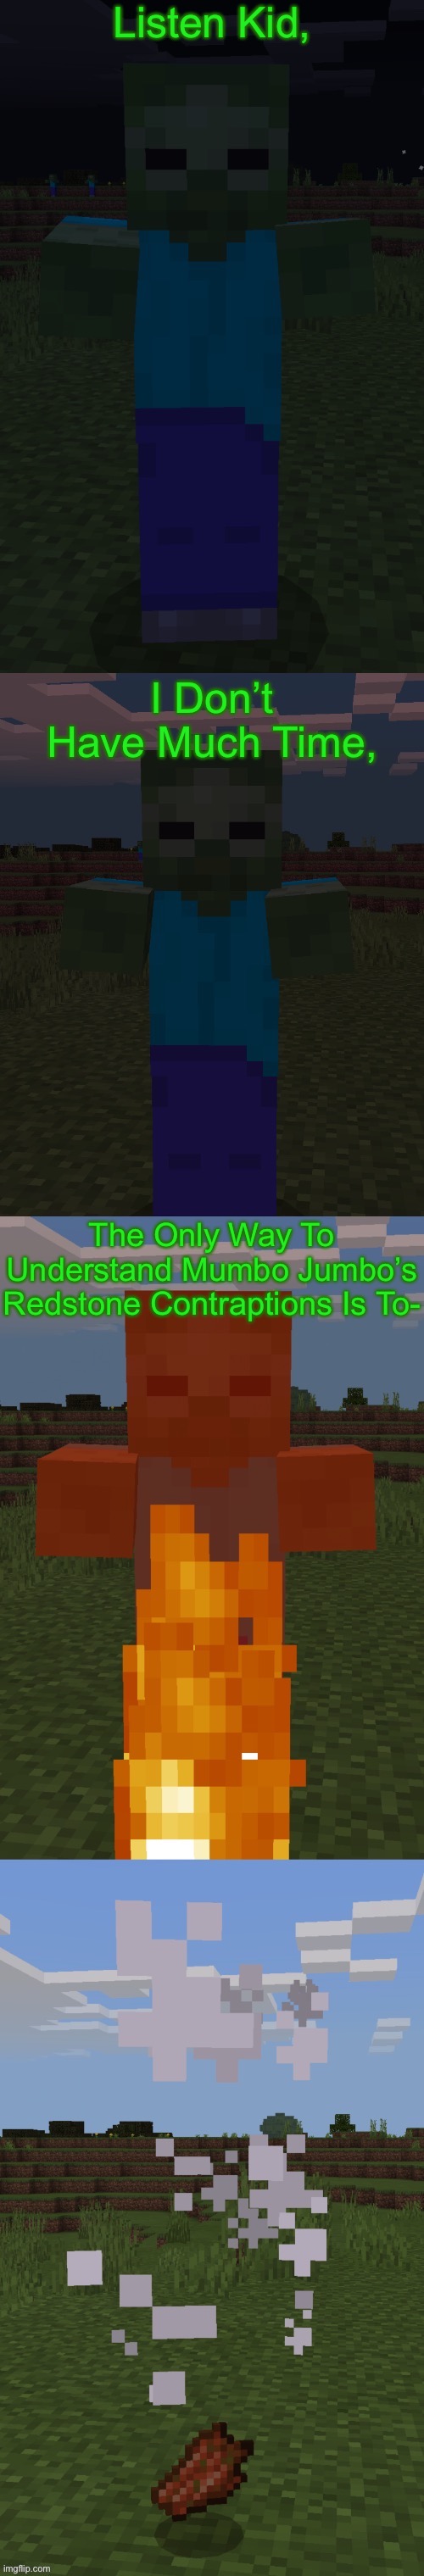 Nooooo! | Listen Kid, I Don’t Have Much Time, The Only Way To Understand Mumbo Jumbo’s Redstone Contraptions Is To- | image tagged in burning zombie | made w/ Imgflip meme maker